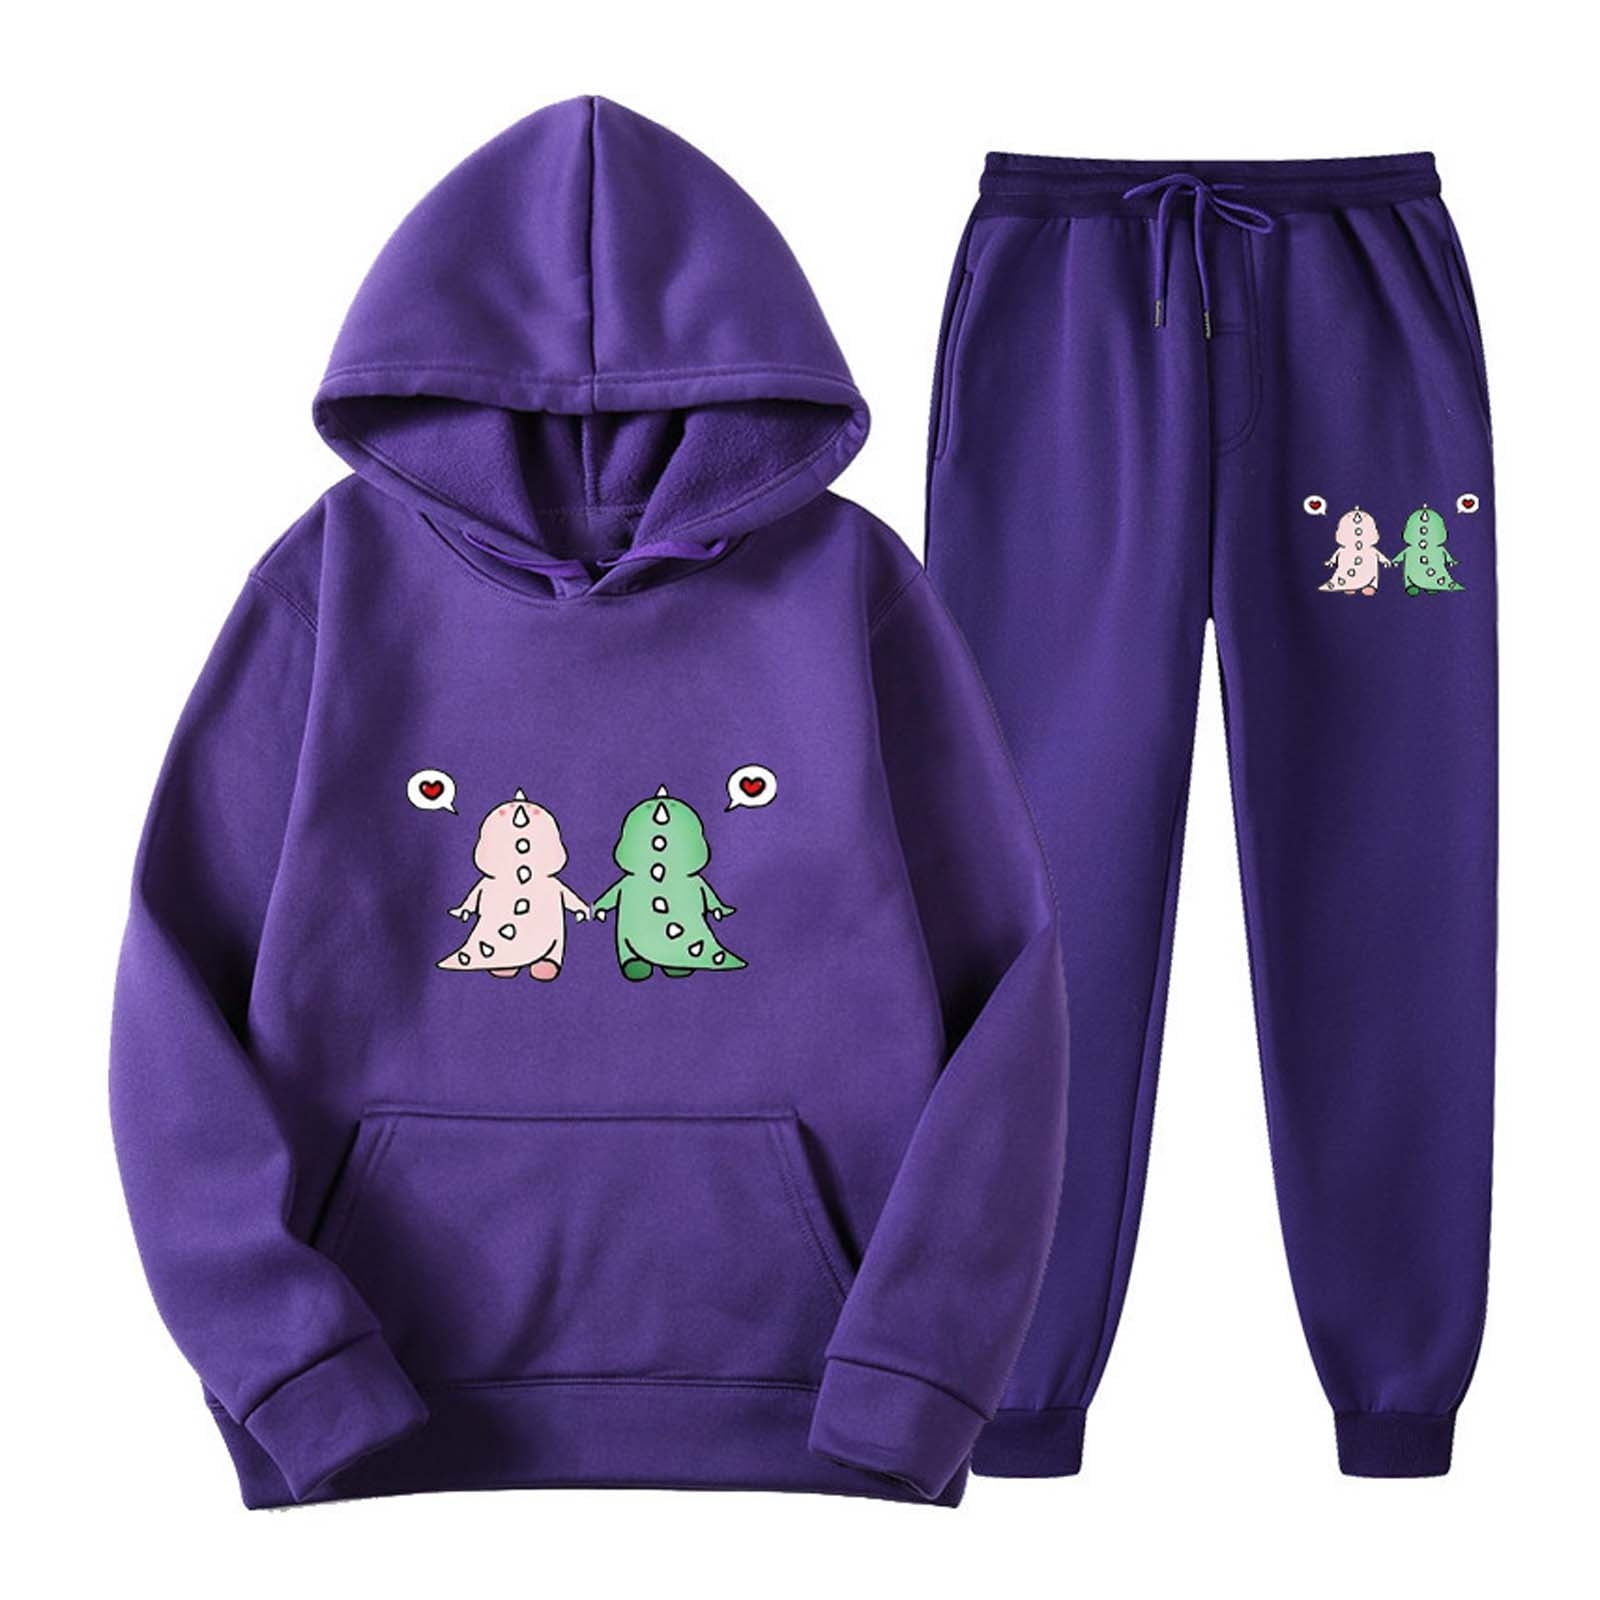 RQYYD Reduced Two Piece Outfits for Women Lounge Sets Pullover Sweatshirt  Sweatpants Sweatsuits Set with Kangaroo Pockets Dinosaur Hoodie Suit Purple  L